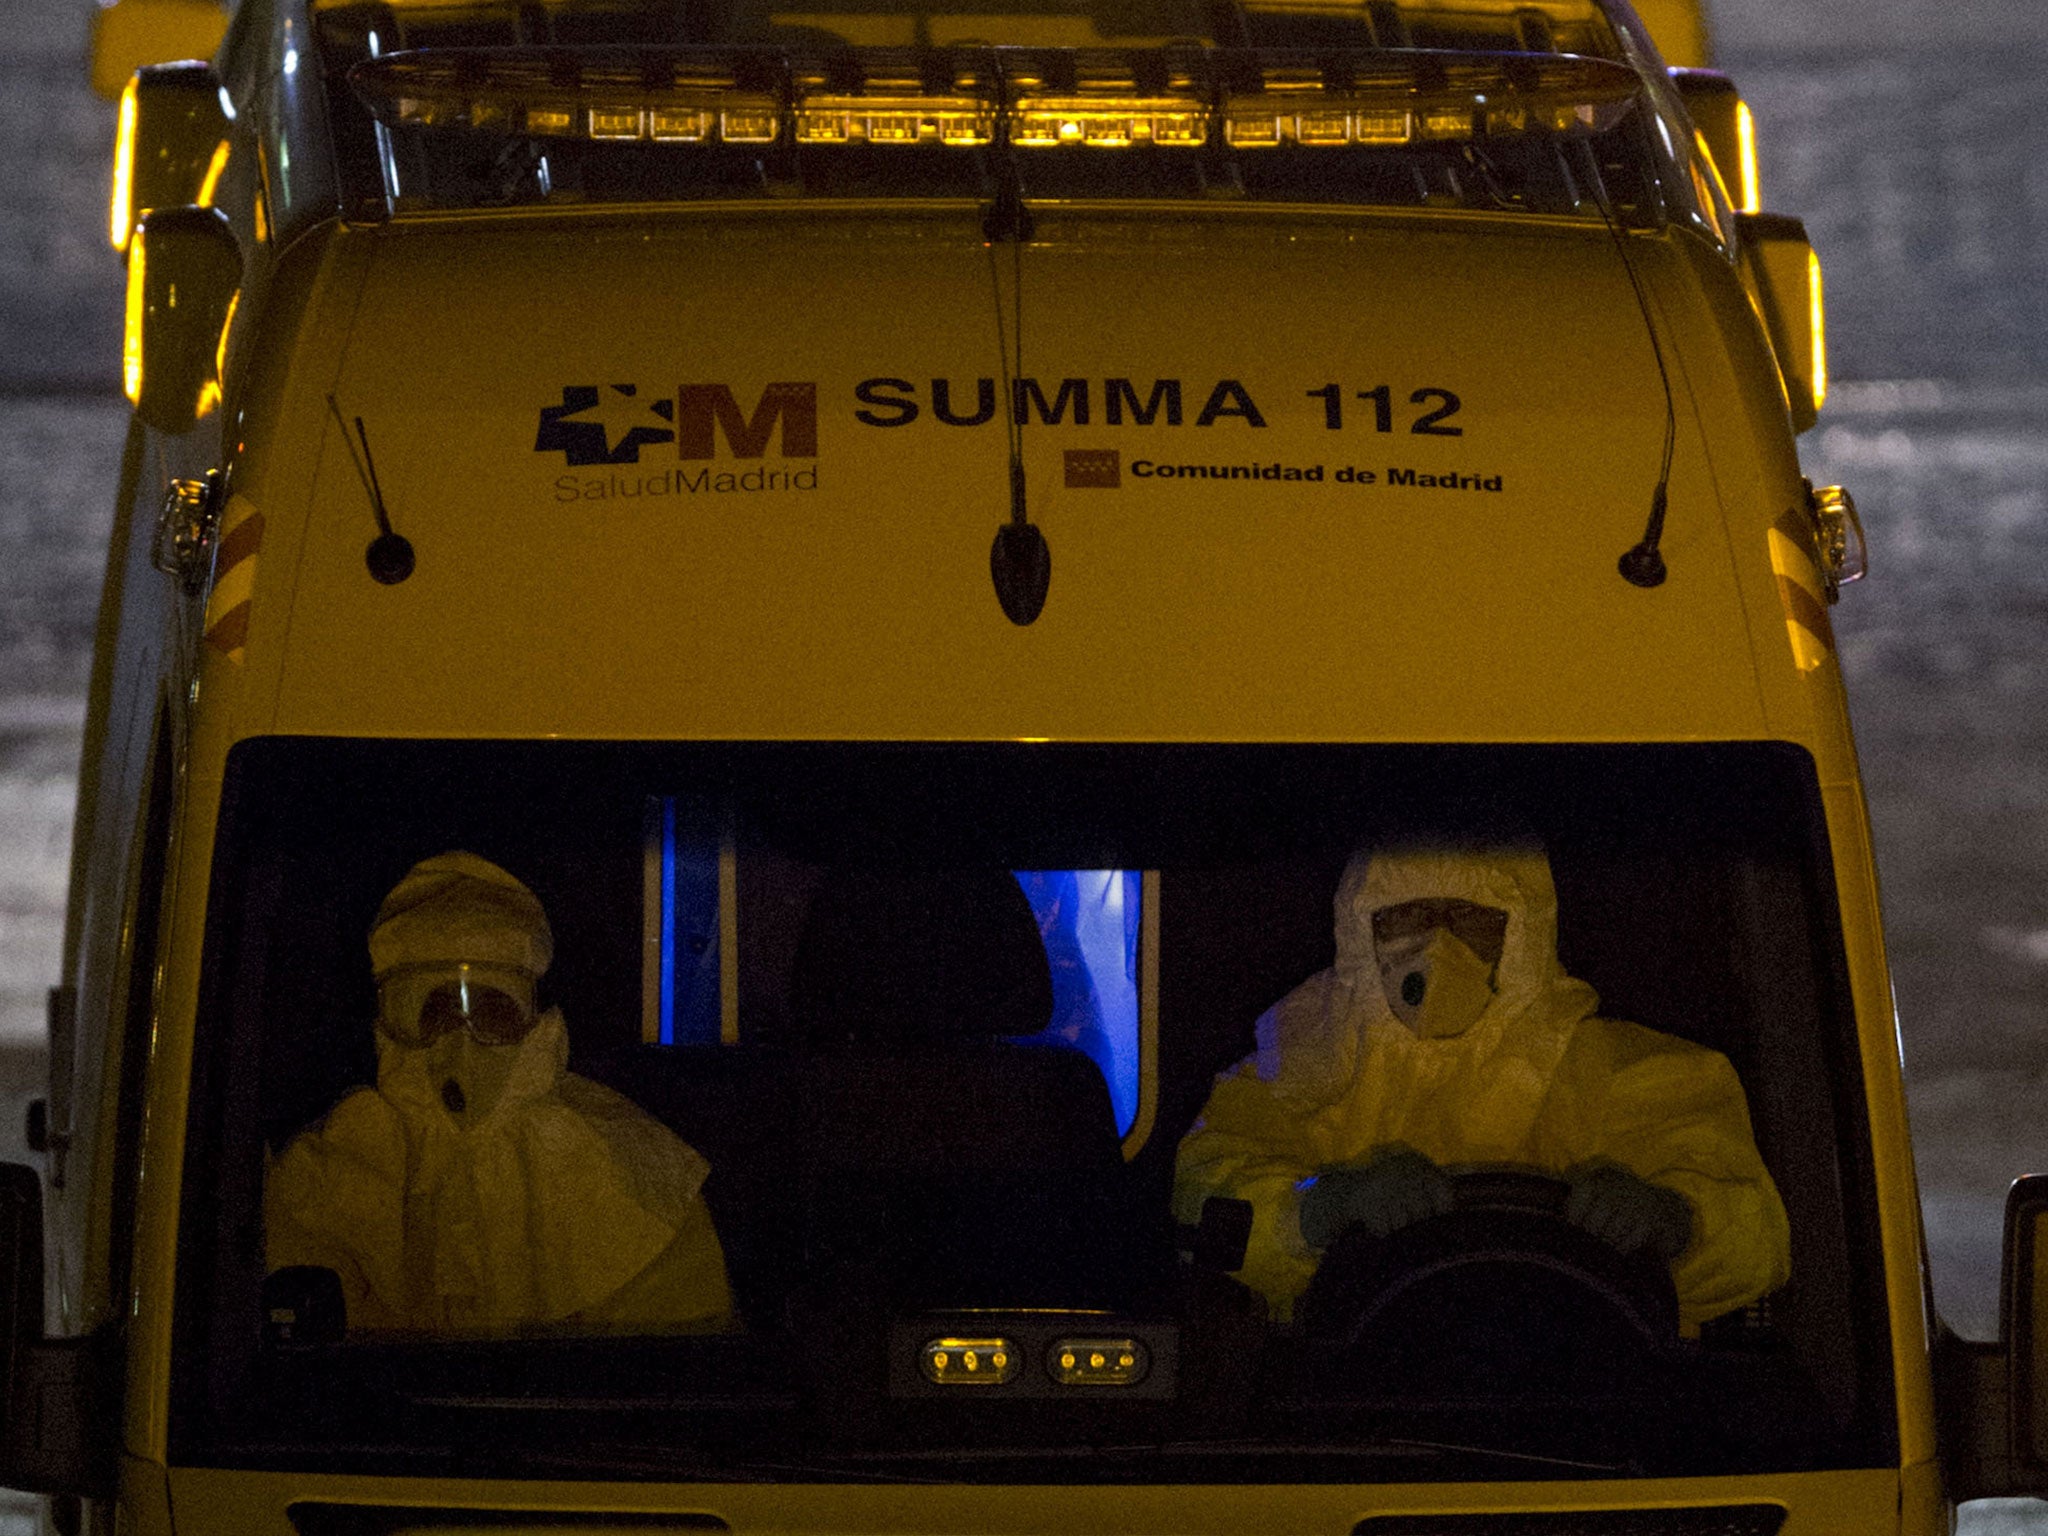 The Spanish nurse infected by Ebola is moved by ambulance to Carlos III Hospital from Alcorcon Hospital on October 8, 2014 in Alcorcon, Spain